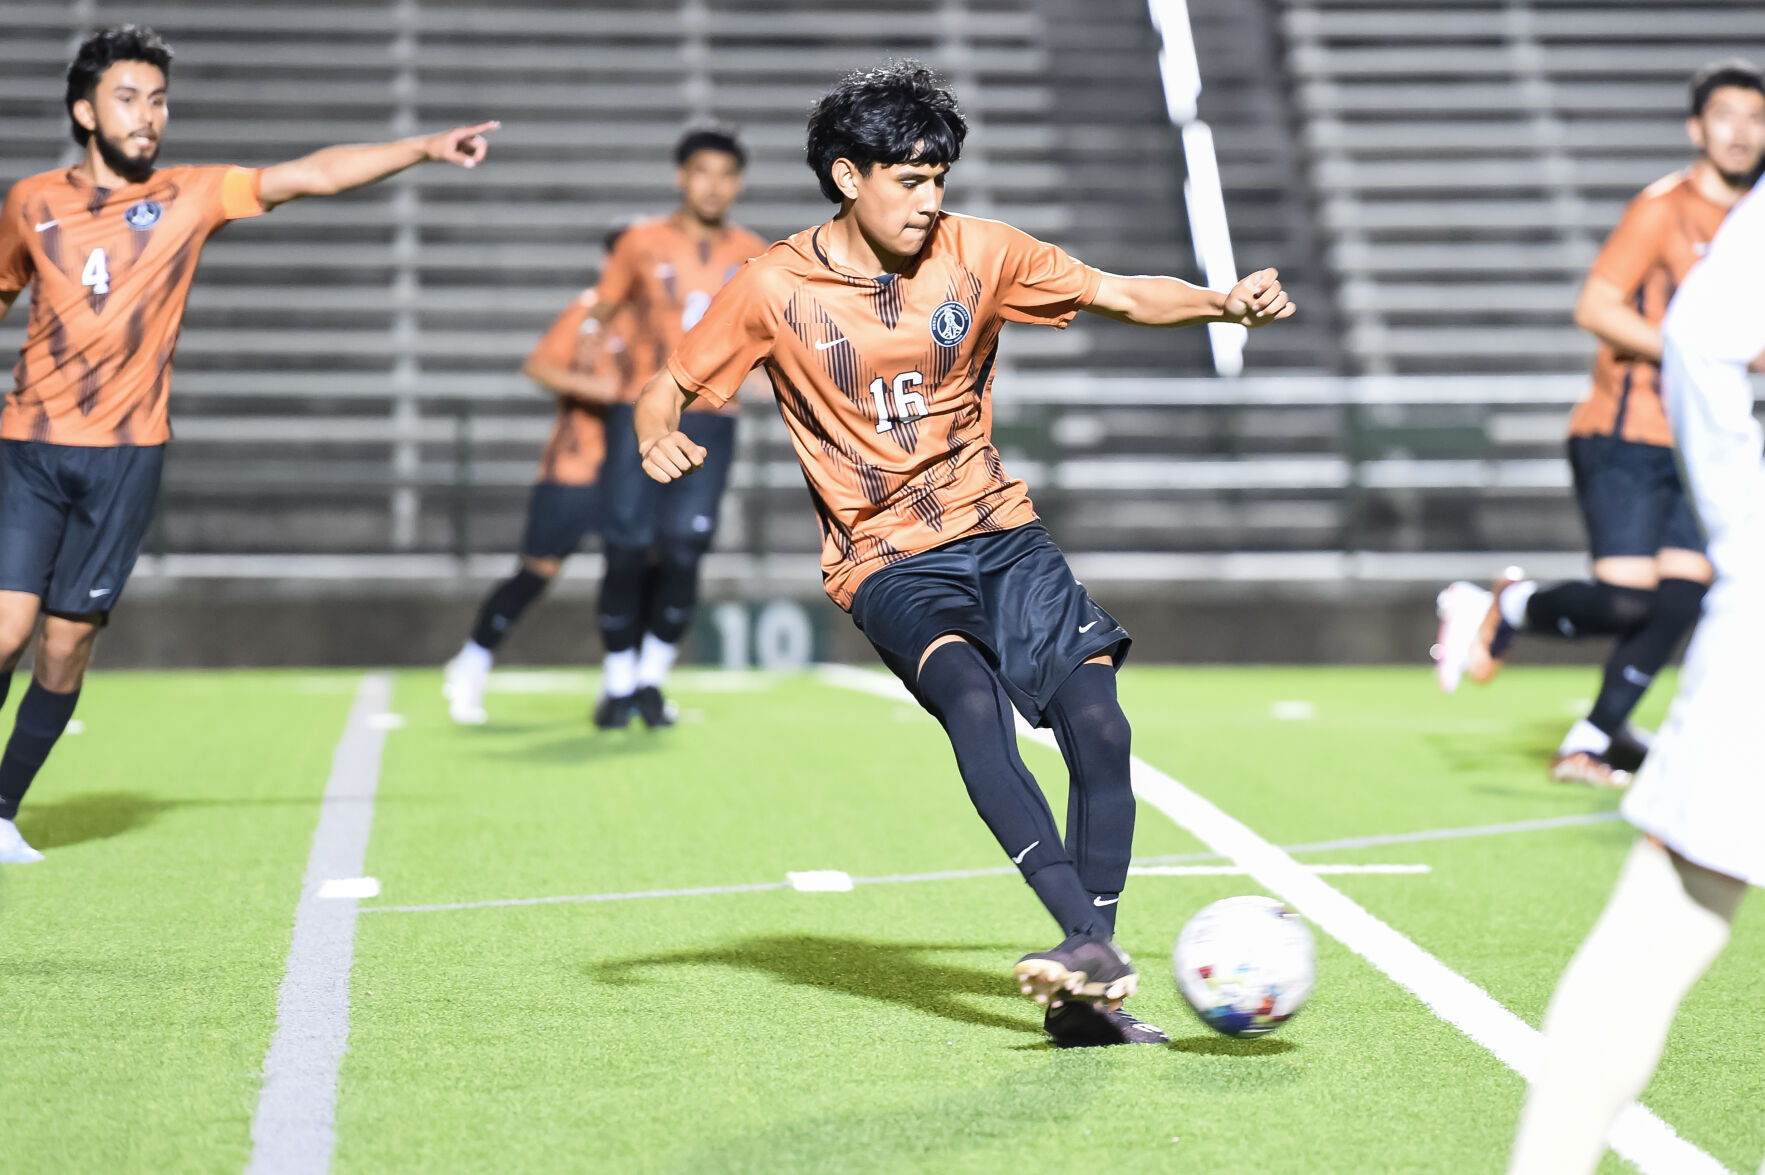 High School Soccer Roundup: Rockwall-Heath and North Mesquite Dominate as Playoff Races Heat Up